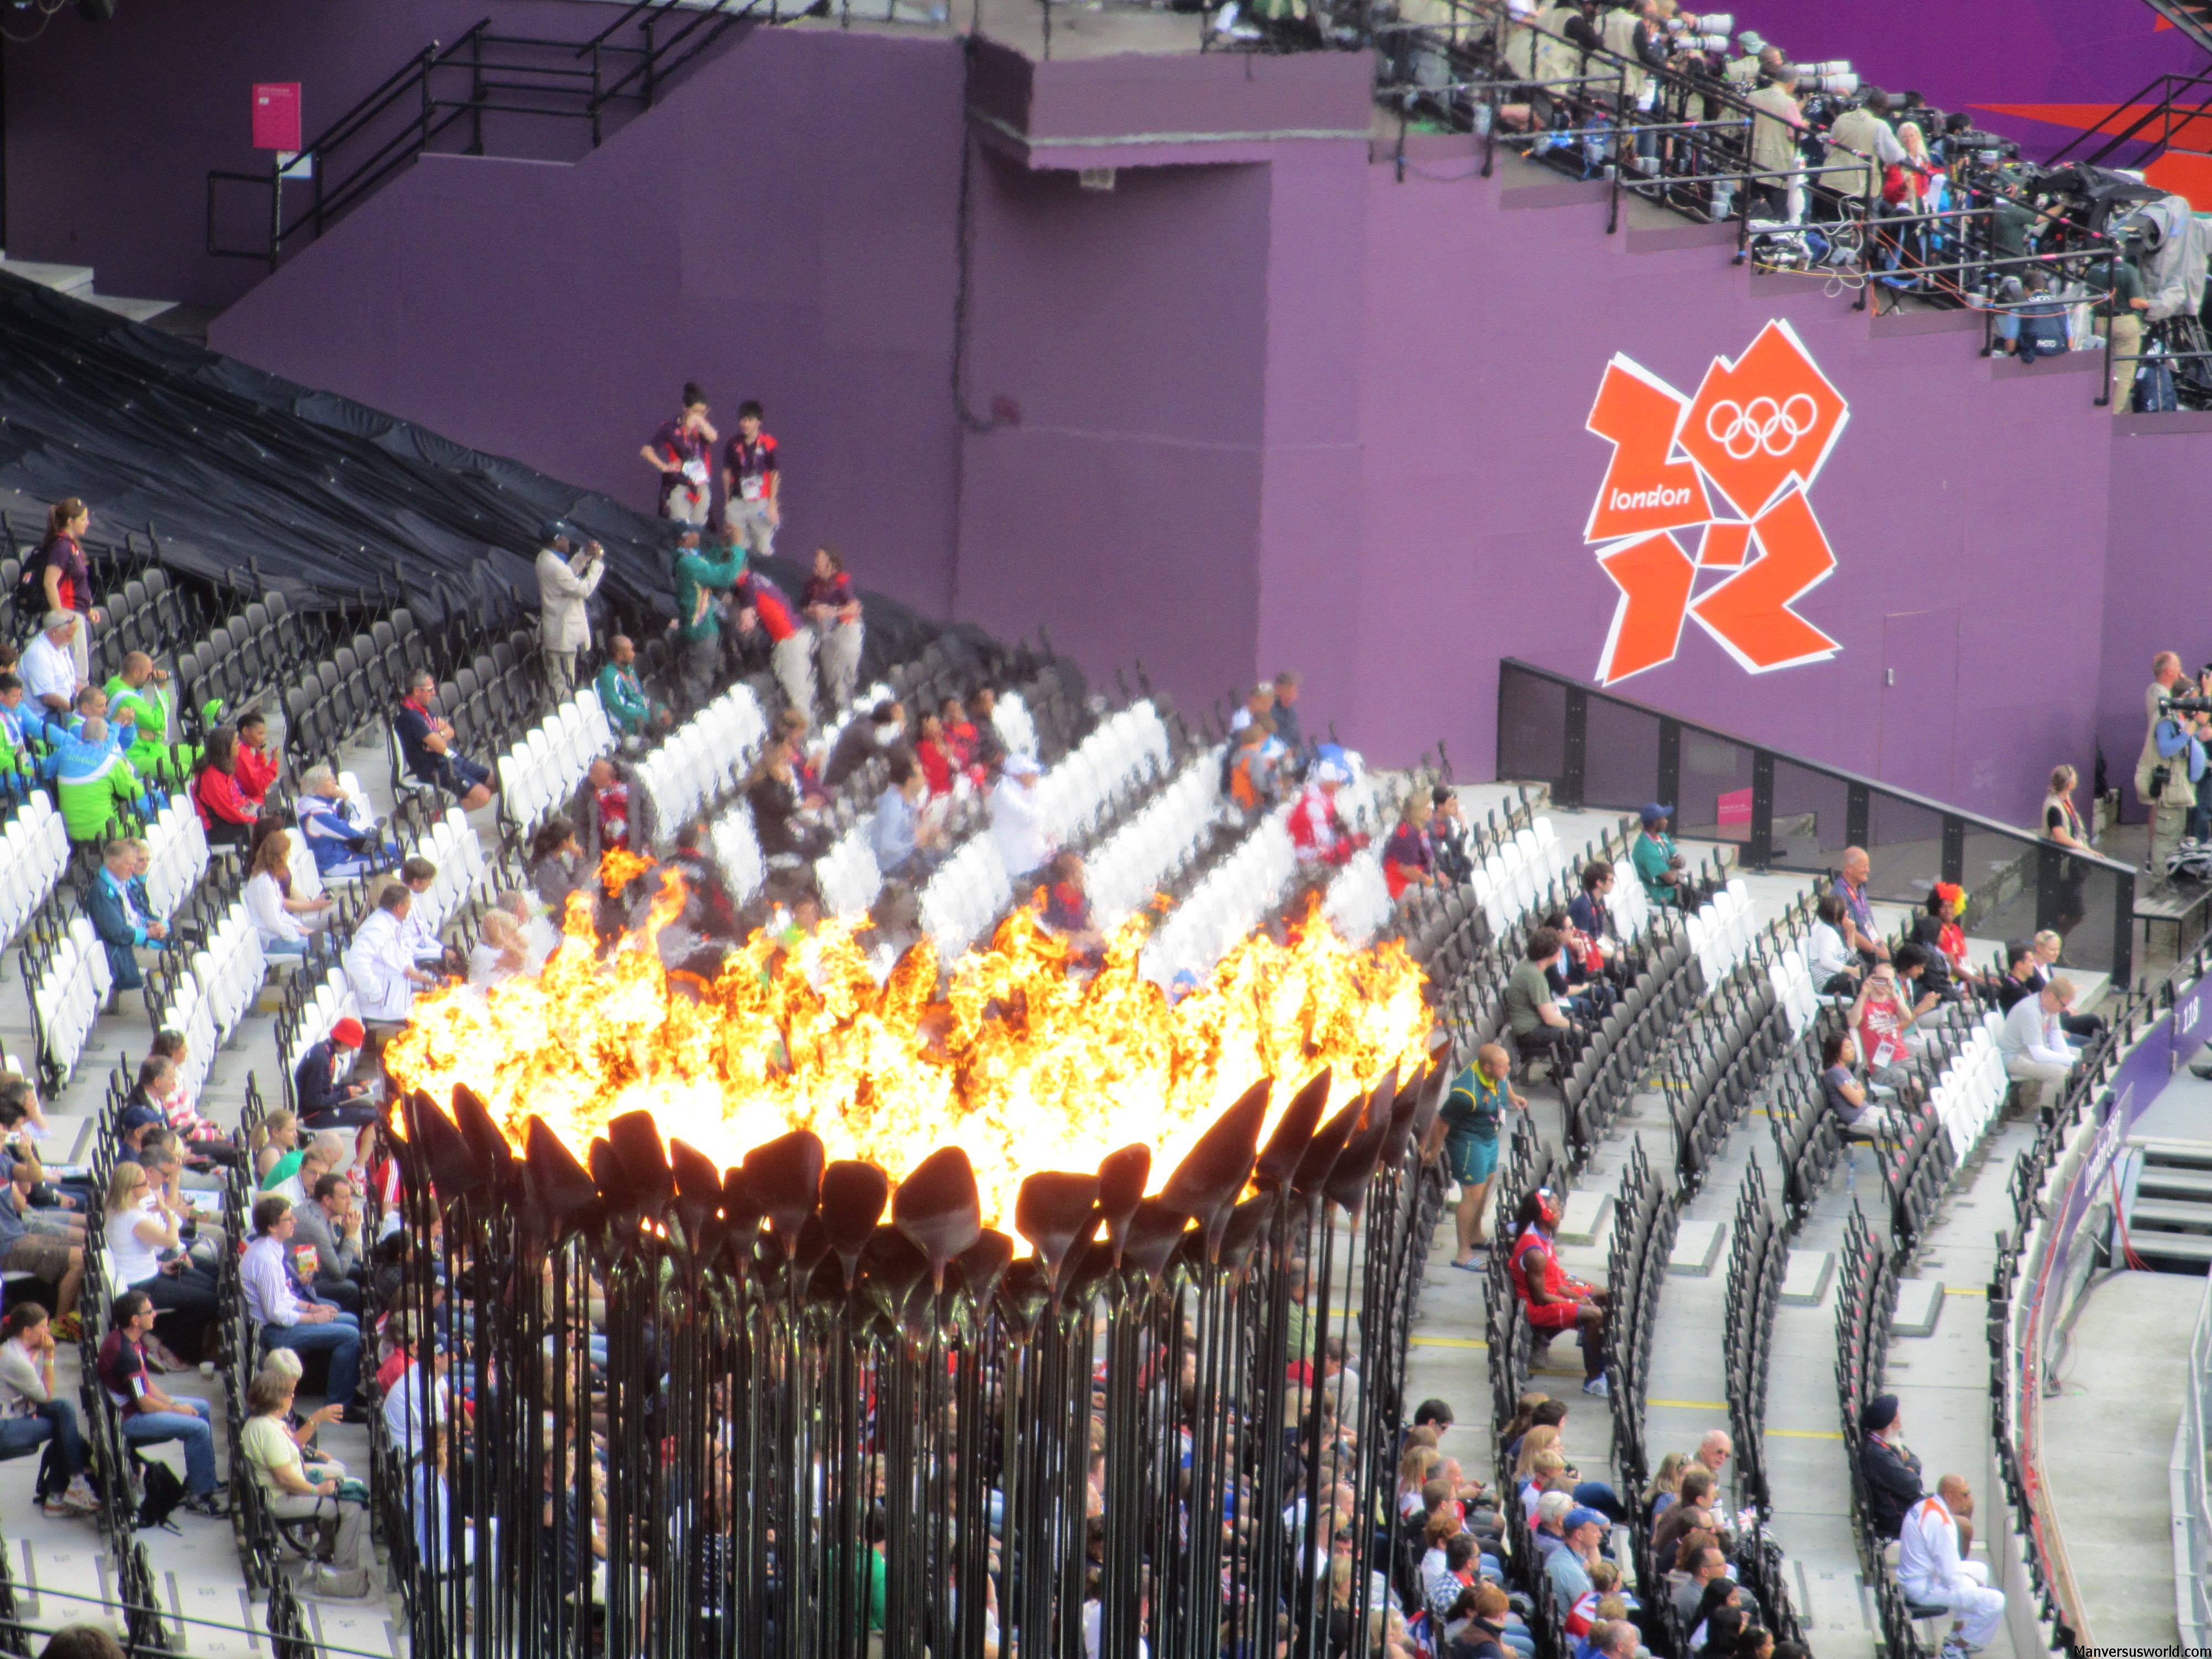 The London 2012 Olympic flame burns bright inside the stadium